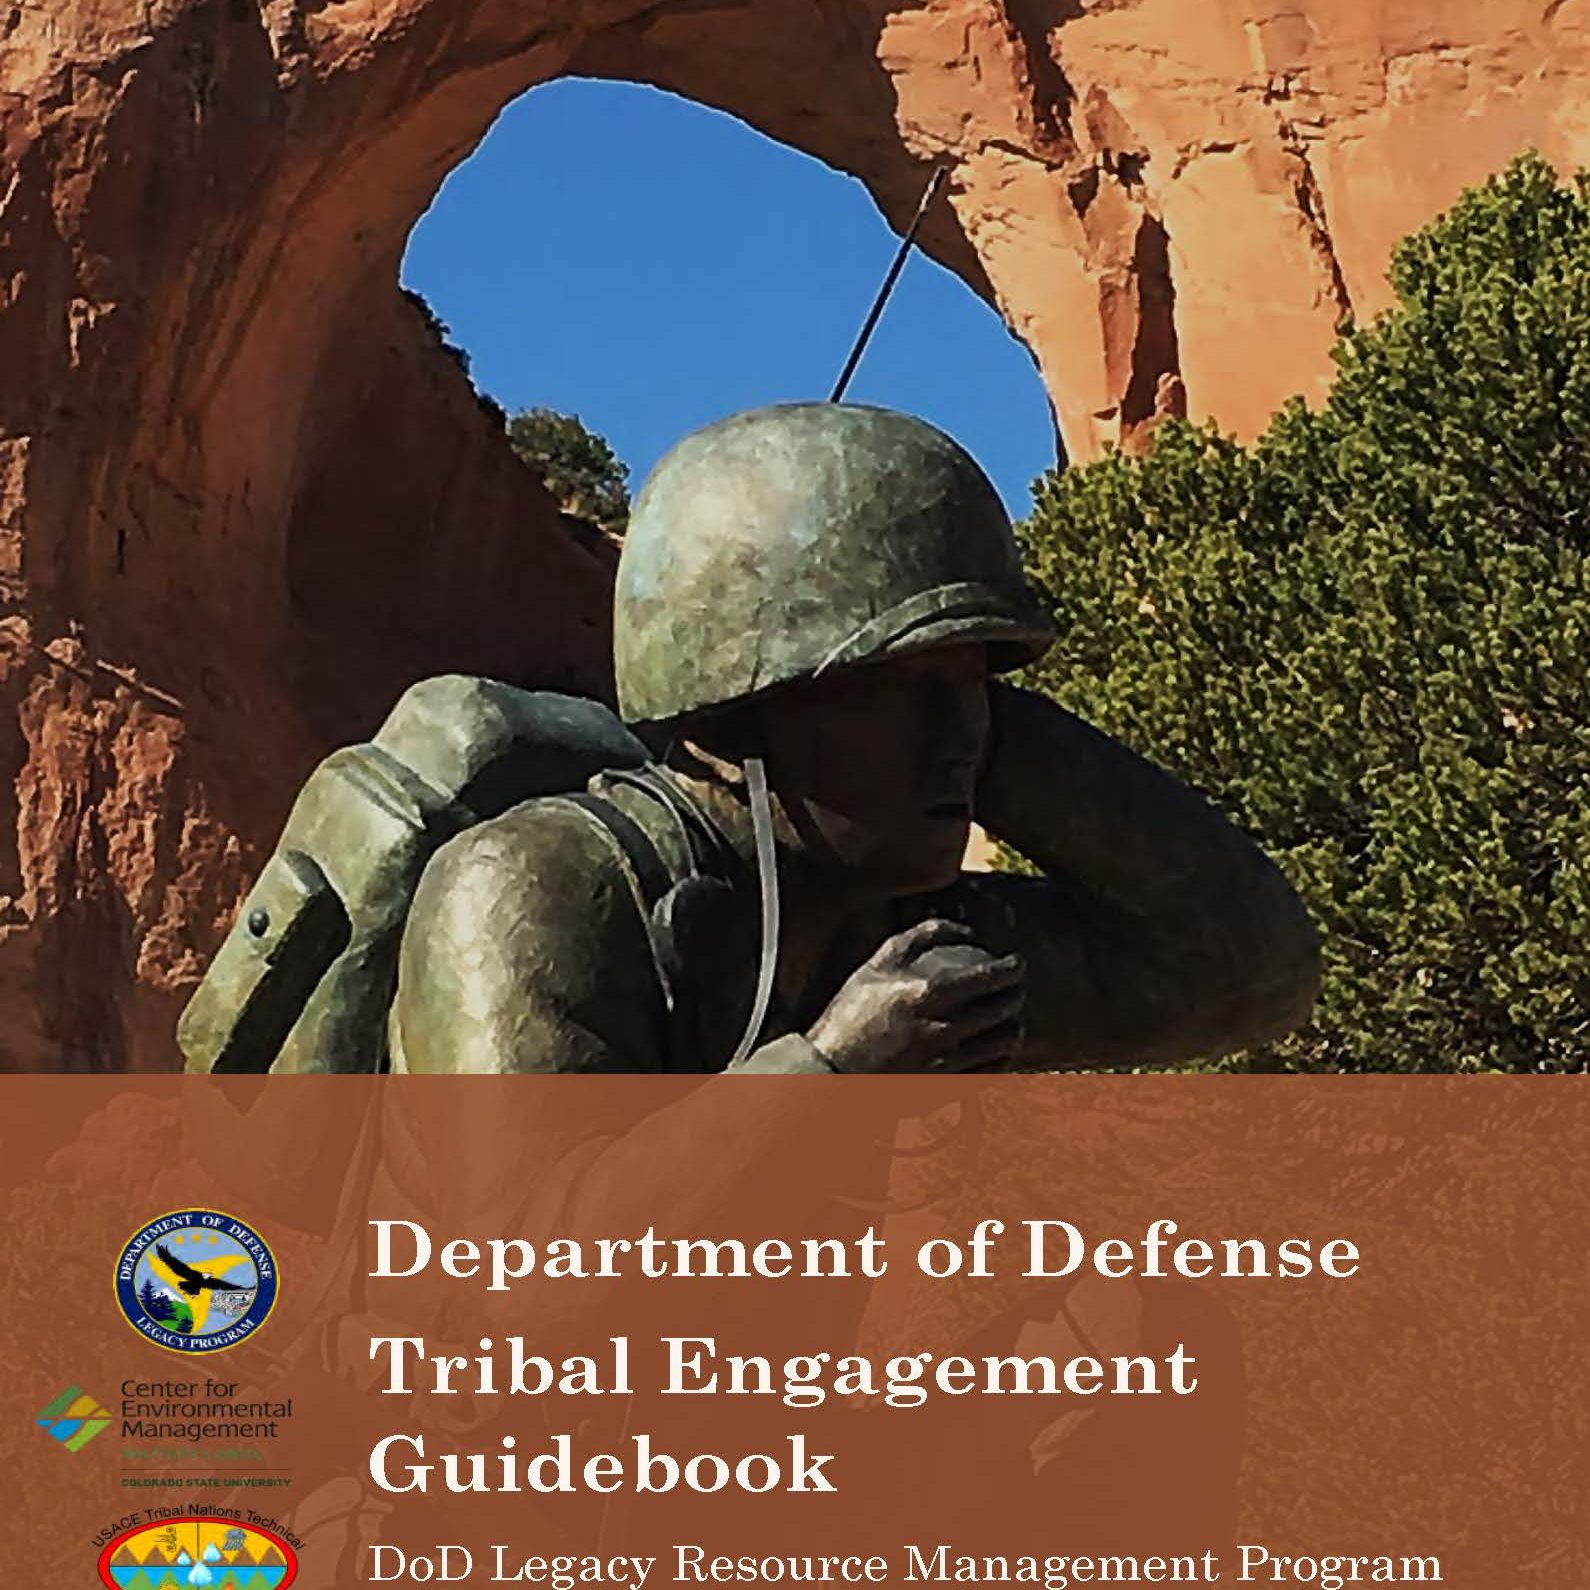 Defense Department Guidebook for Engaging Tribal Nations Cover